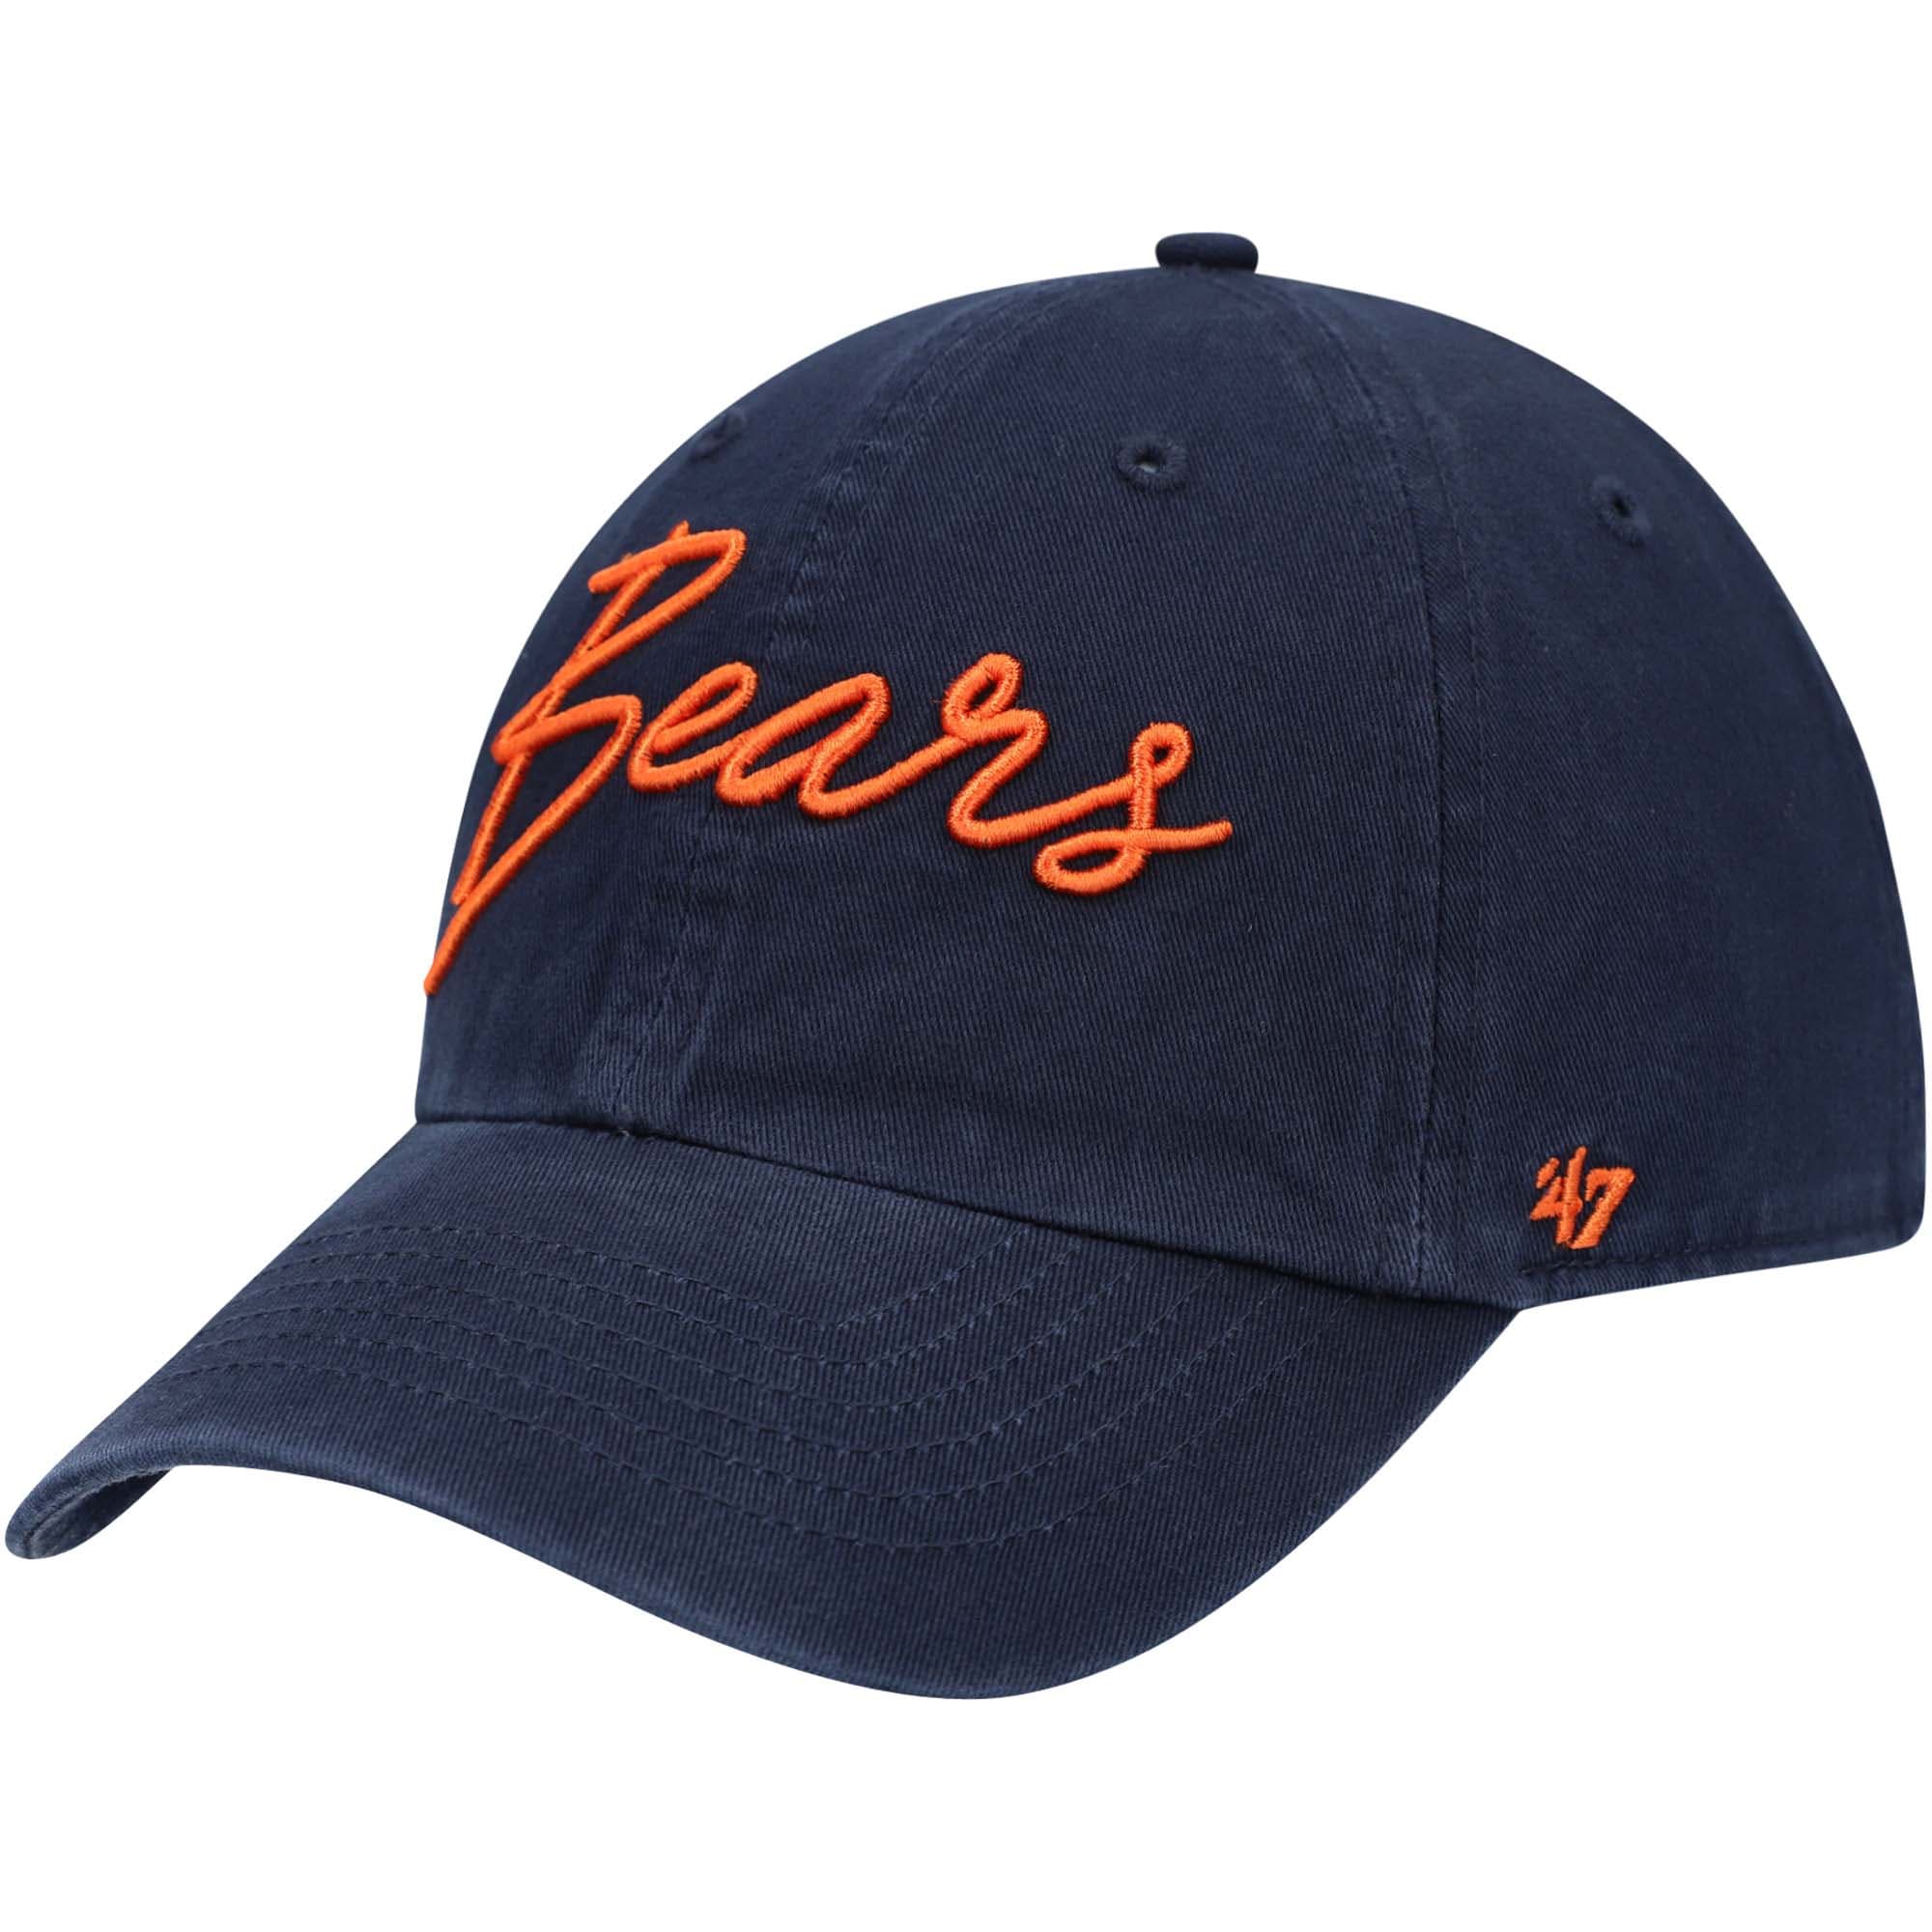 Women's '47 Navy Chicago Bears Vocal Clean Up Adjustable Hat - OSFA - image 1 of 4